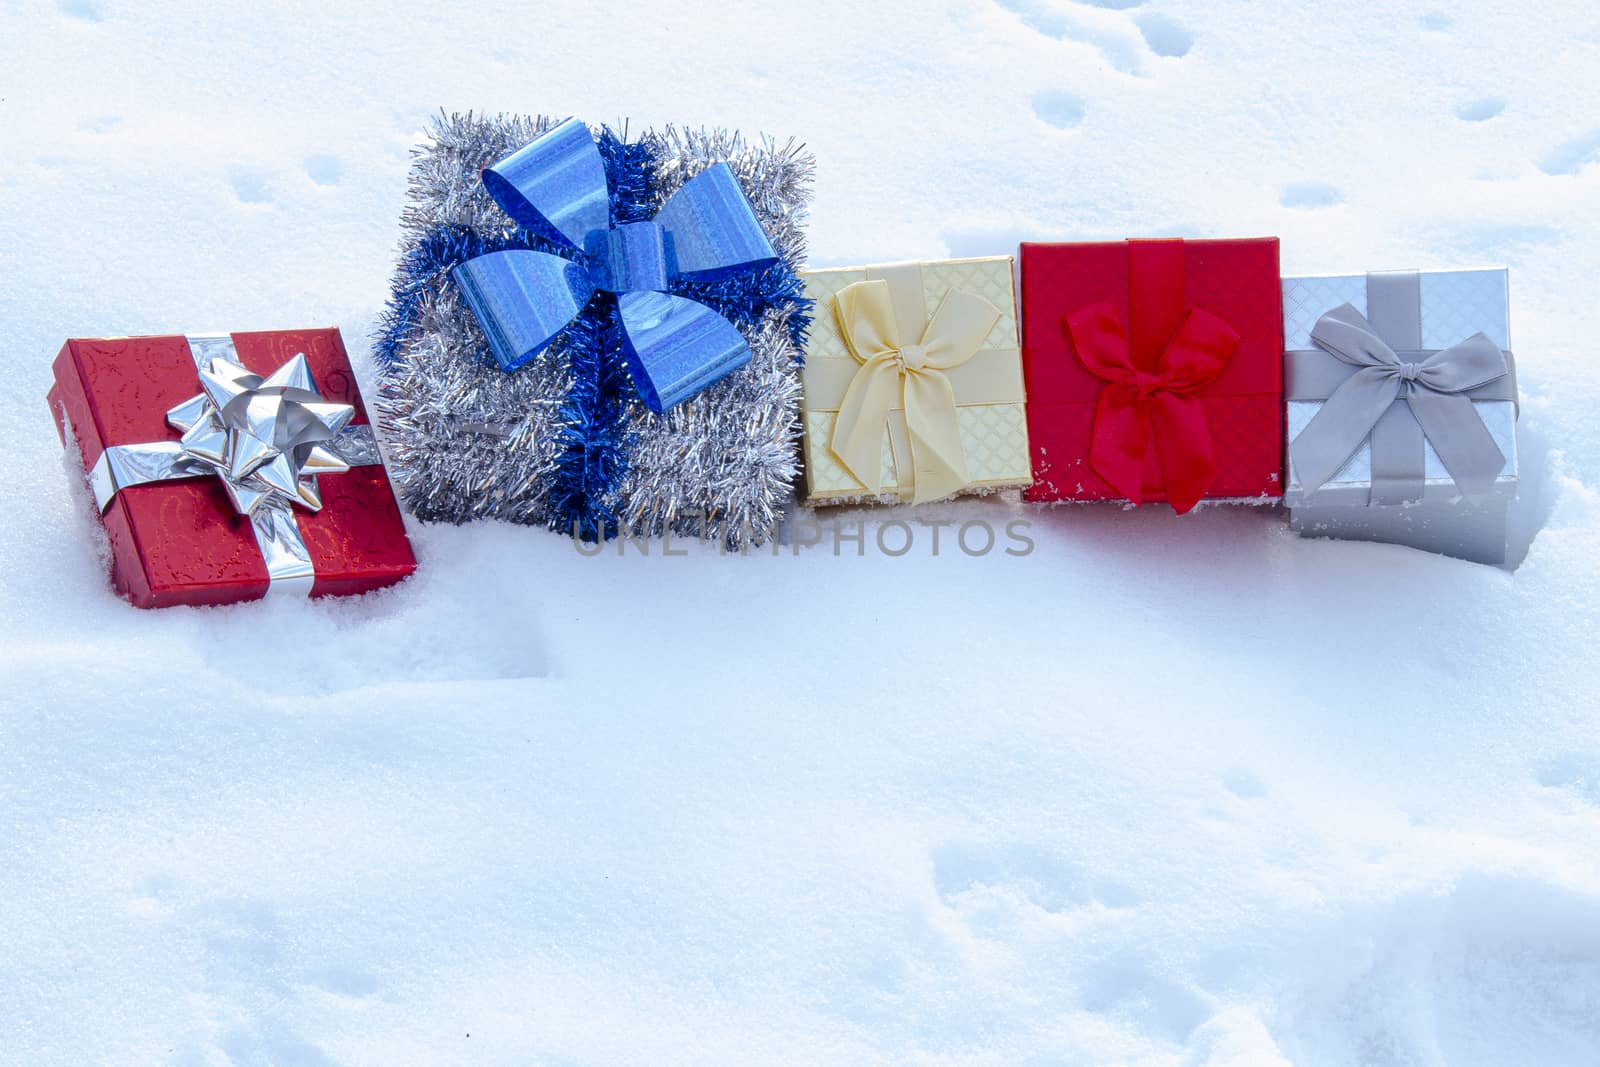 Colourful Gift boxes Presents on snow by oasisamuel